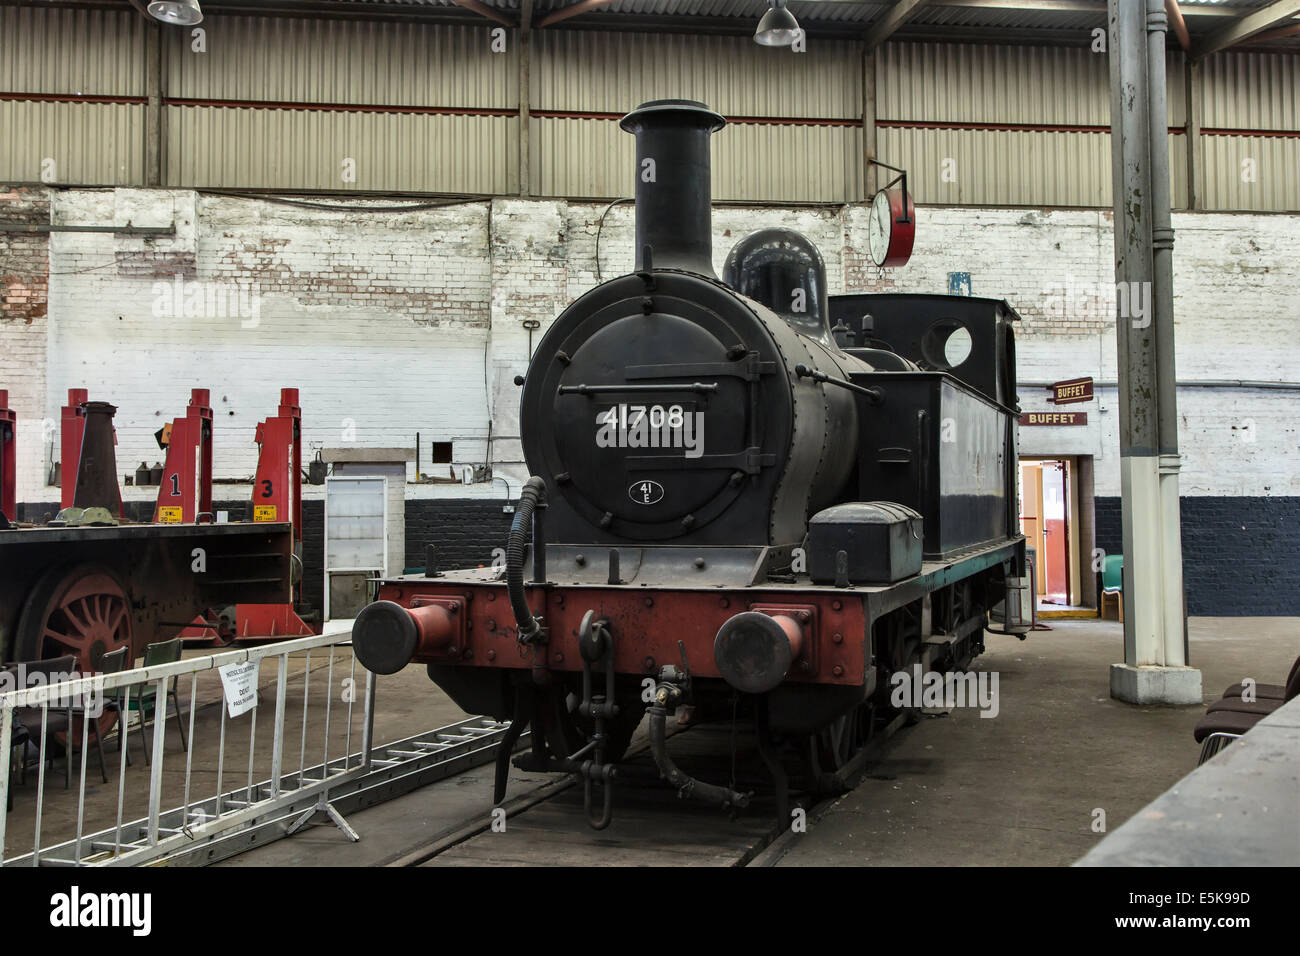 0-6-0T tank engine Ex BR 41708 at Barrow Hill Roundhouse, Derbyshire Stock Photo